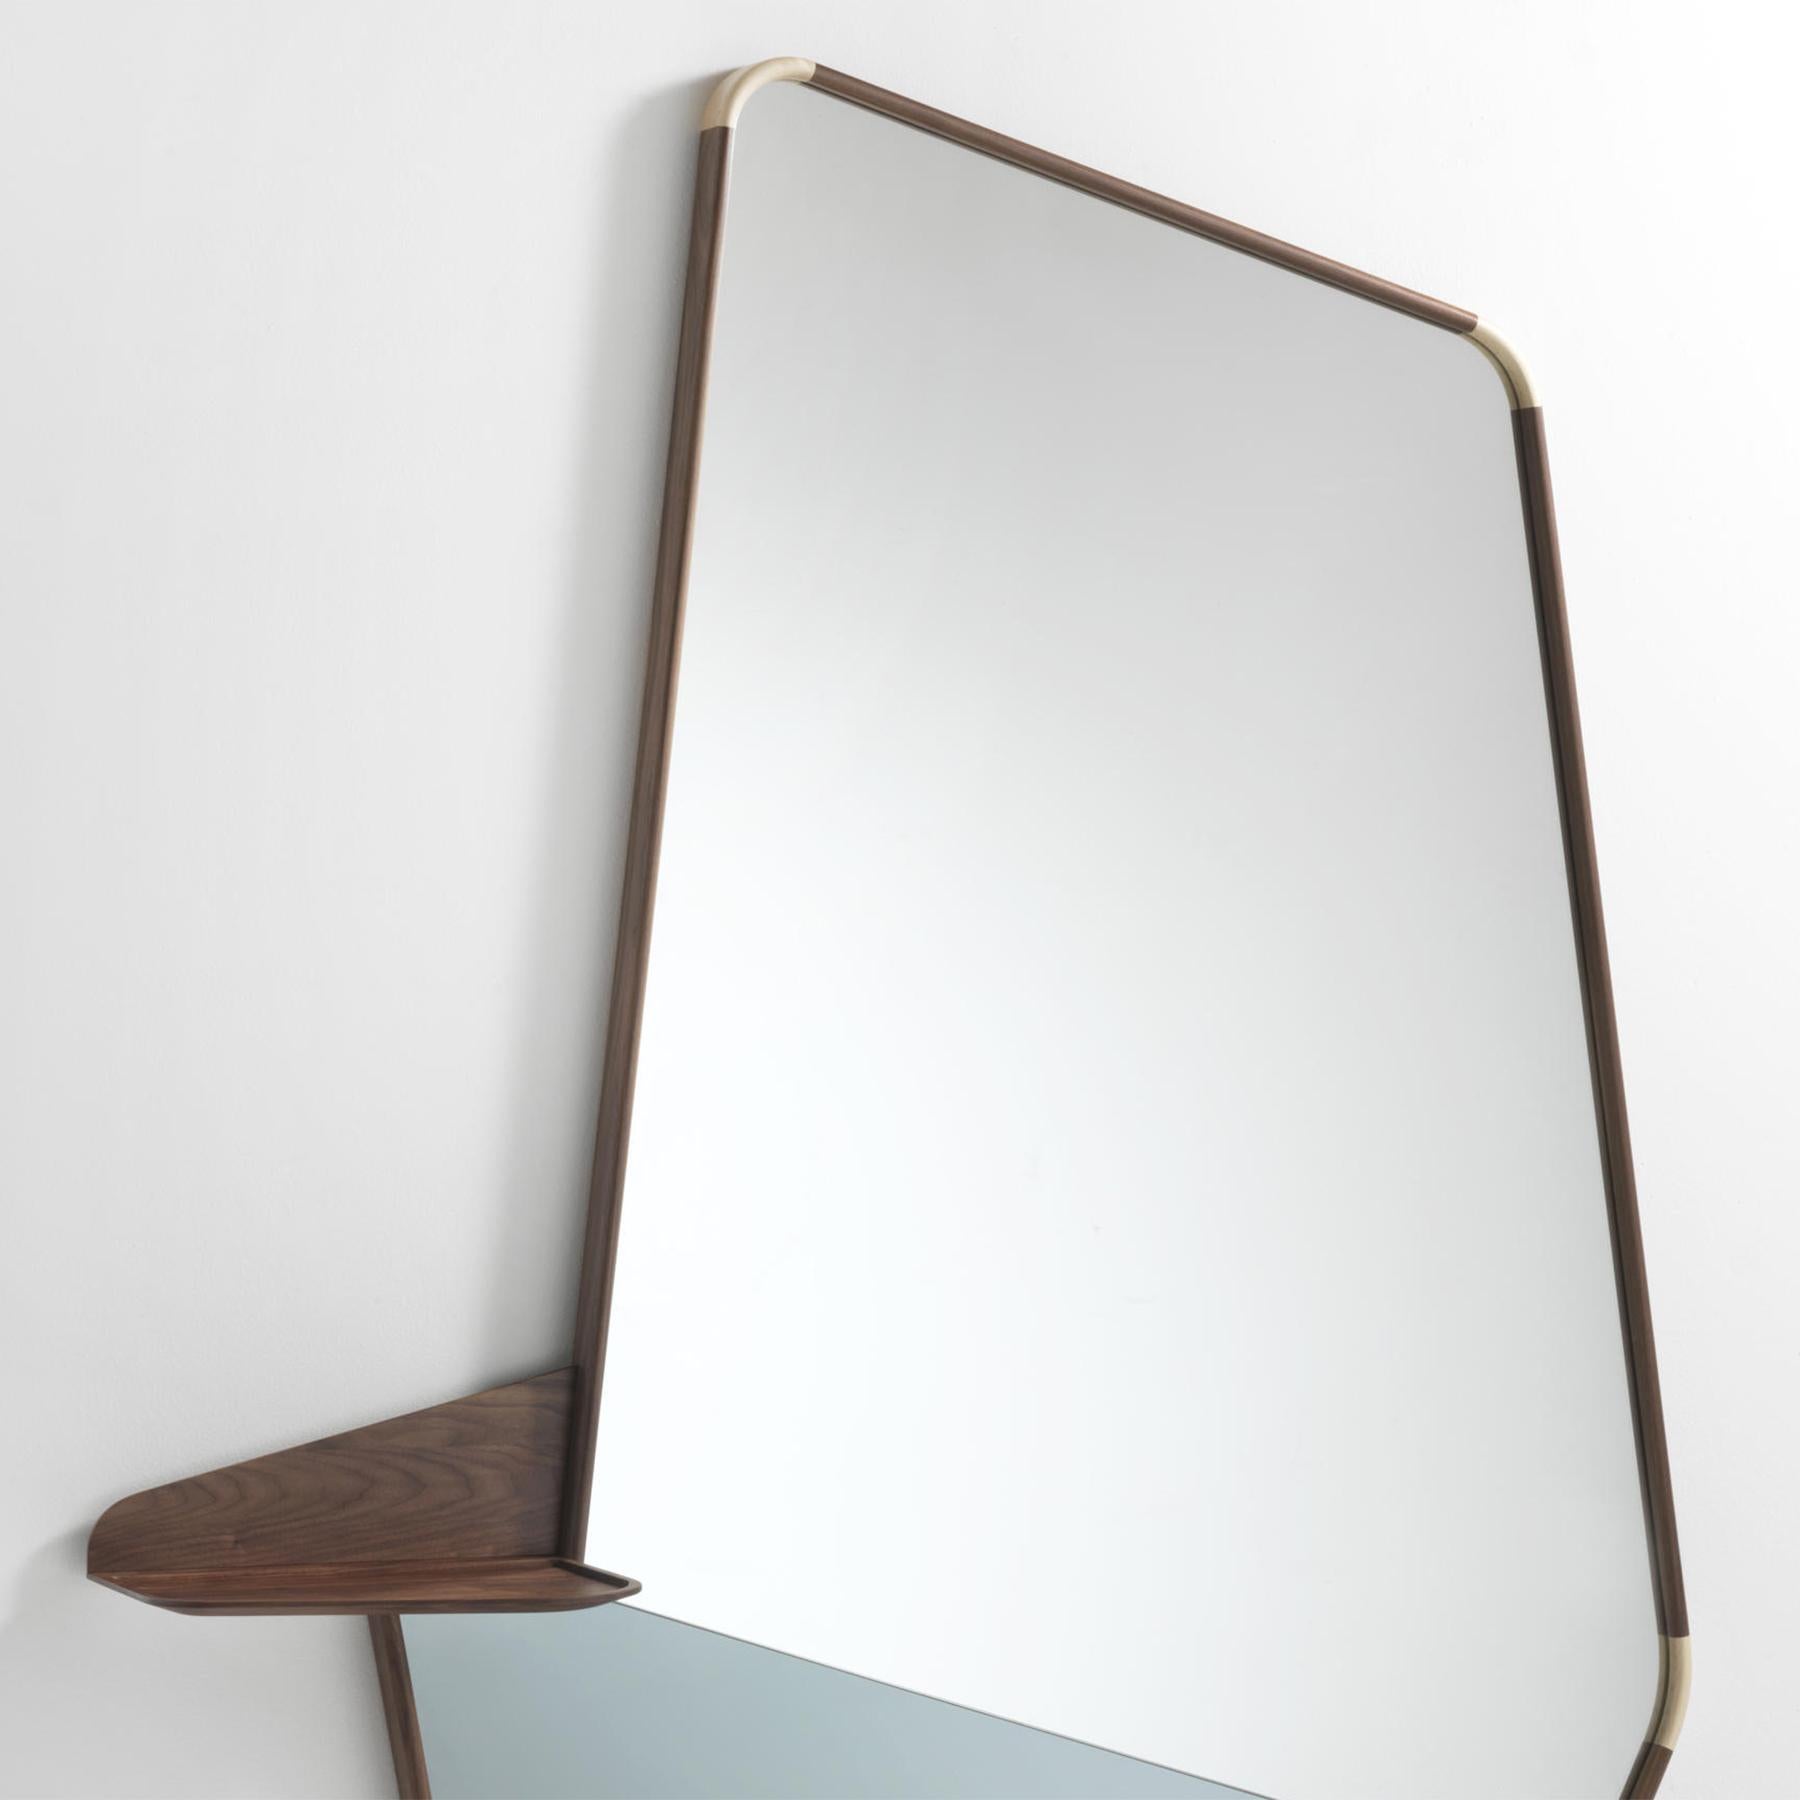 Mirror Shelfy walnut with frame in solid walnut wood
and with maple insert. With clear mirror glass (up) and with
smocked mirror glass (down). With walnut shelf on the
left included in the mirror frame.
Shelf dimensions: L 40 x D 27 cm, shelf height